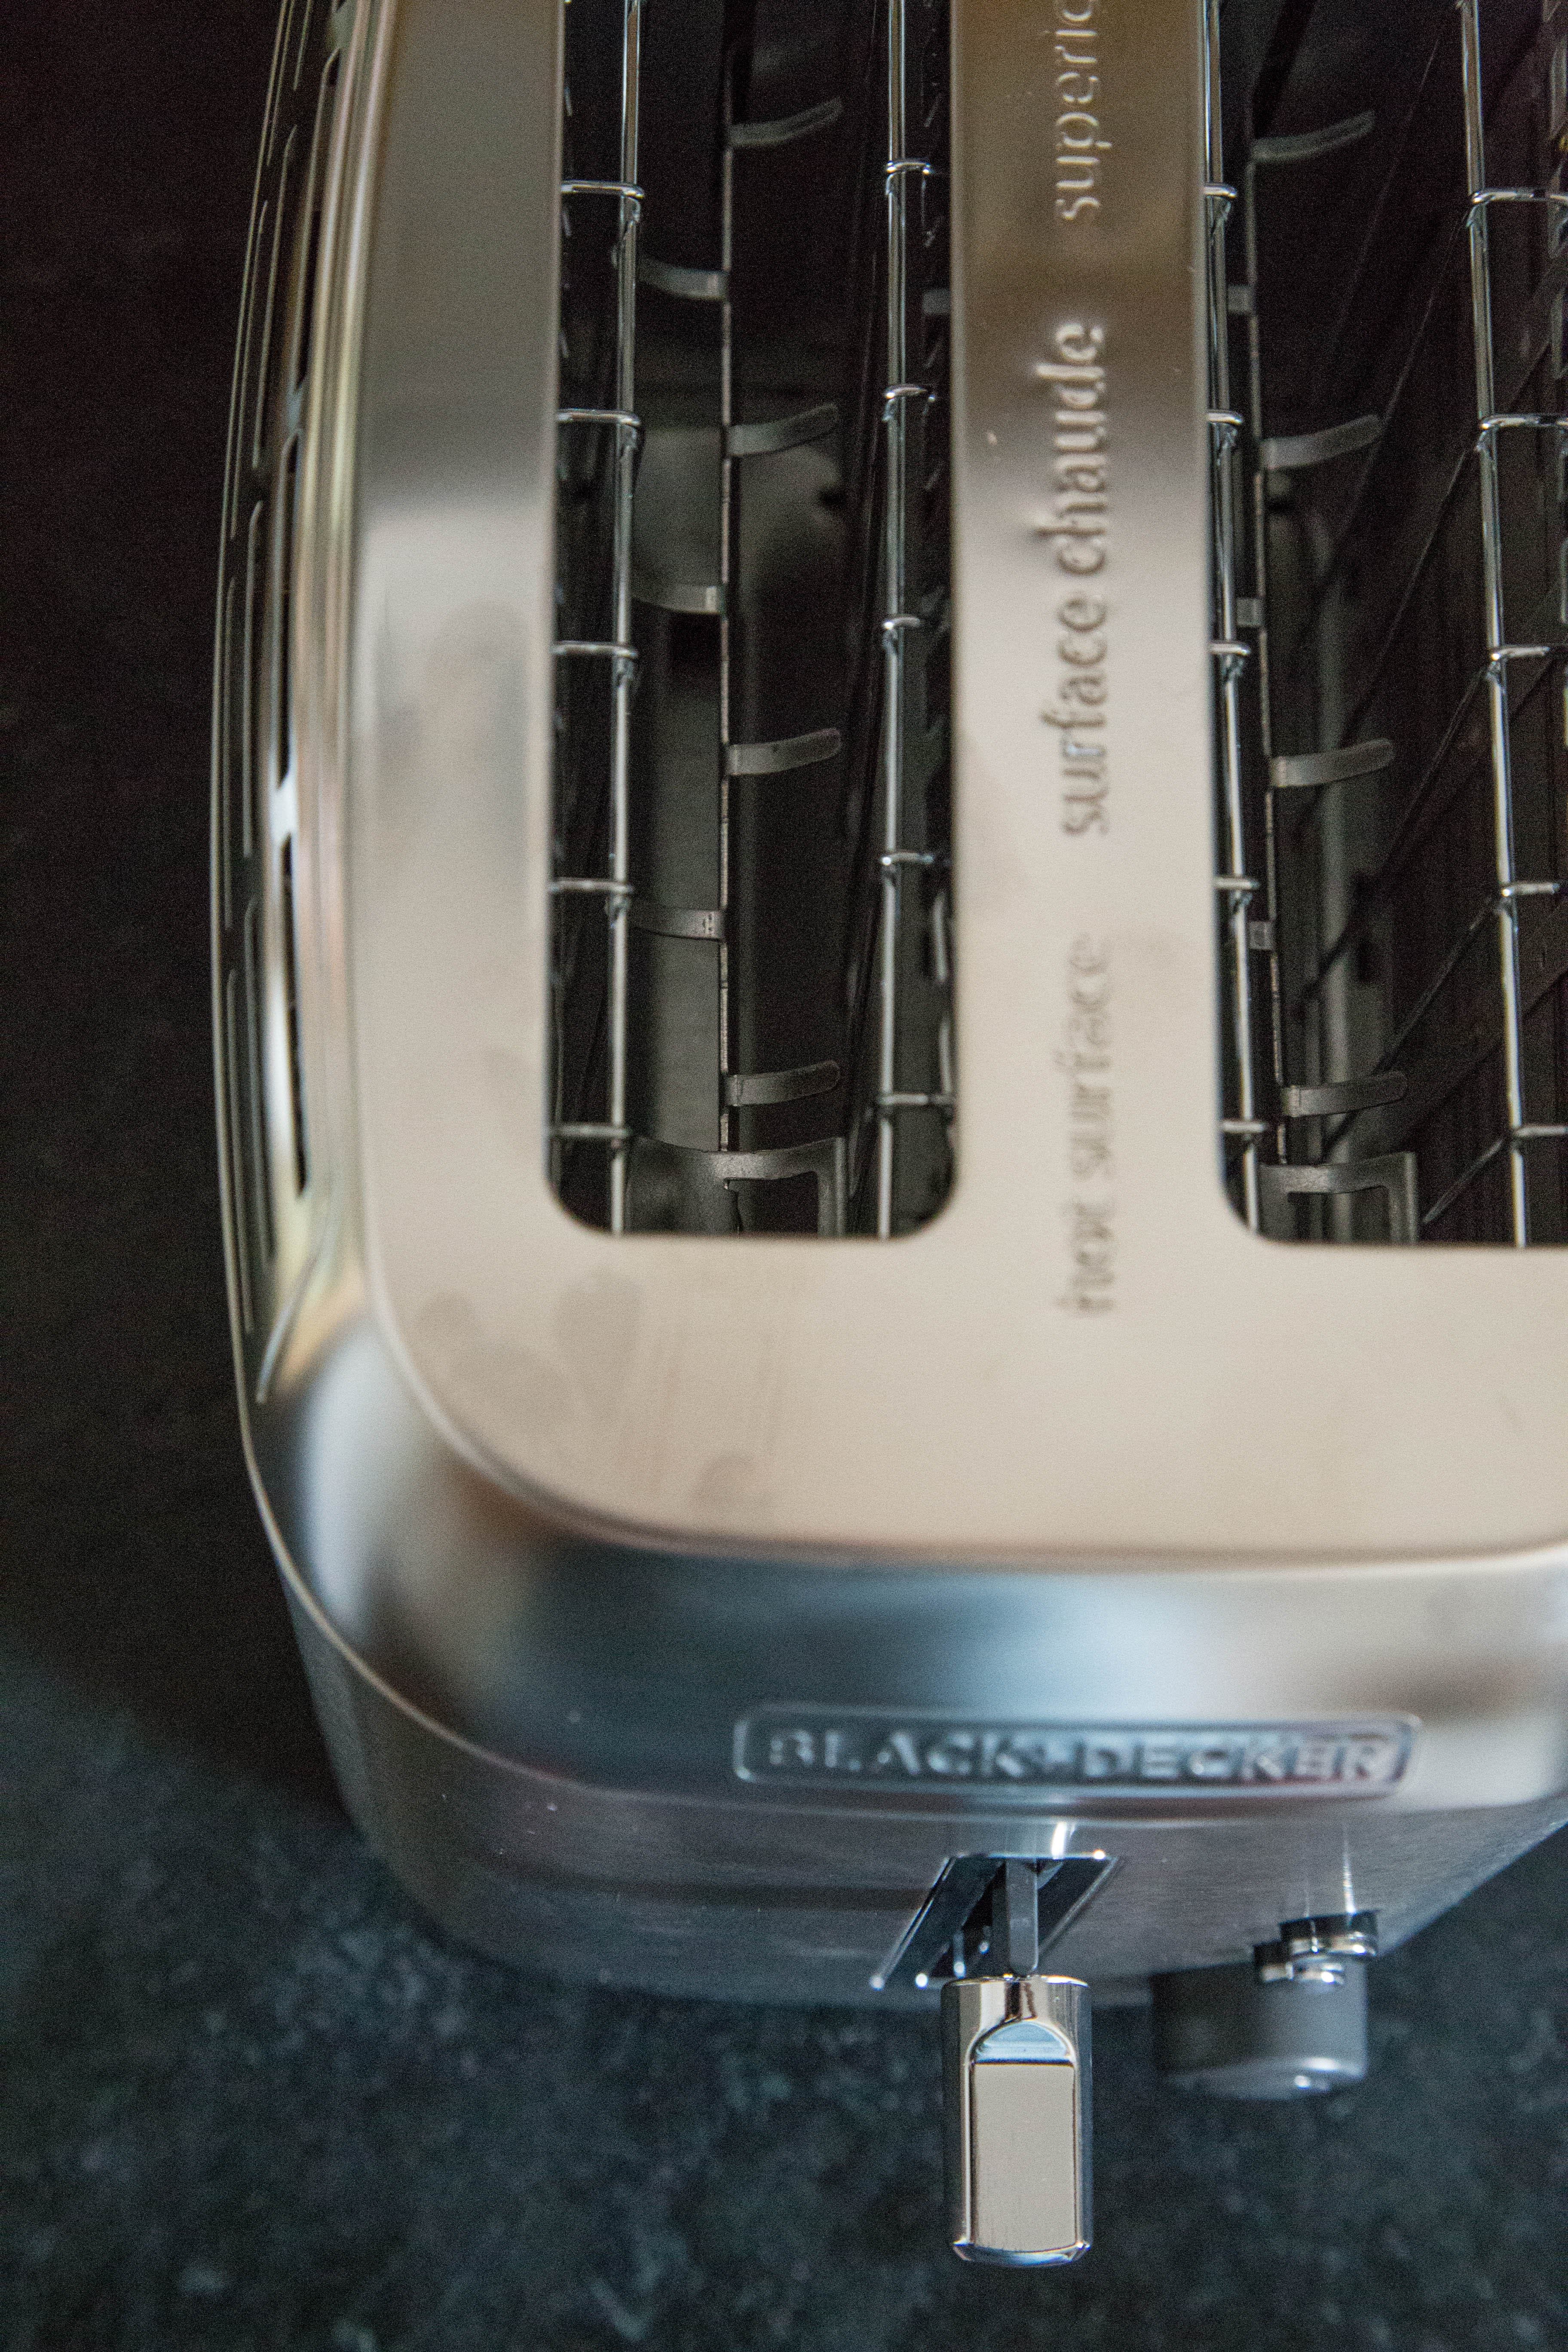 The Black & Decker Rapid-Toast Toaster Works True to Its Name